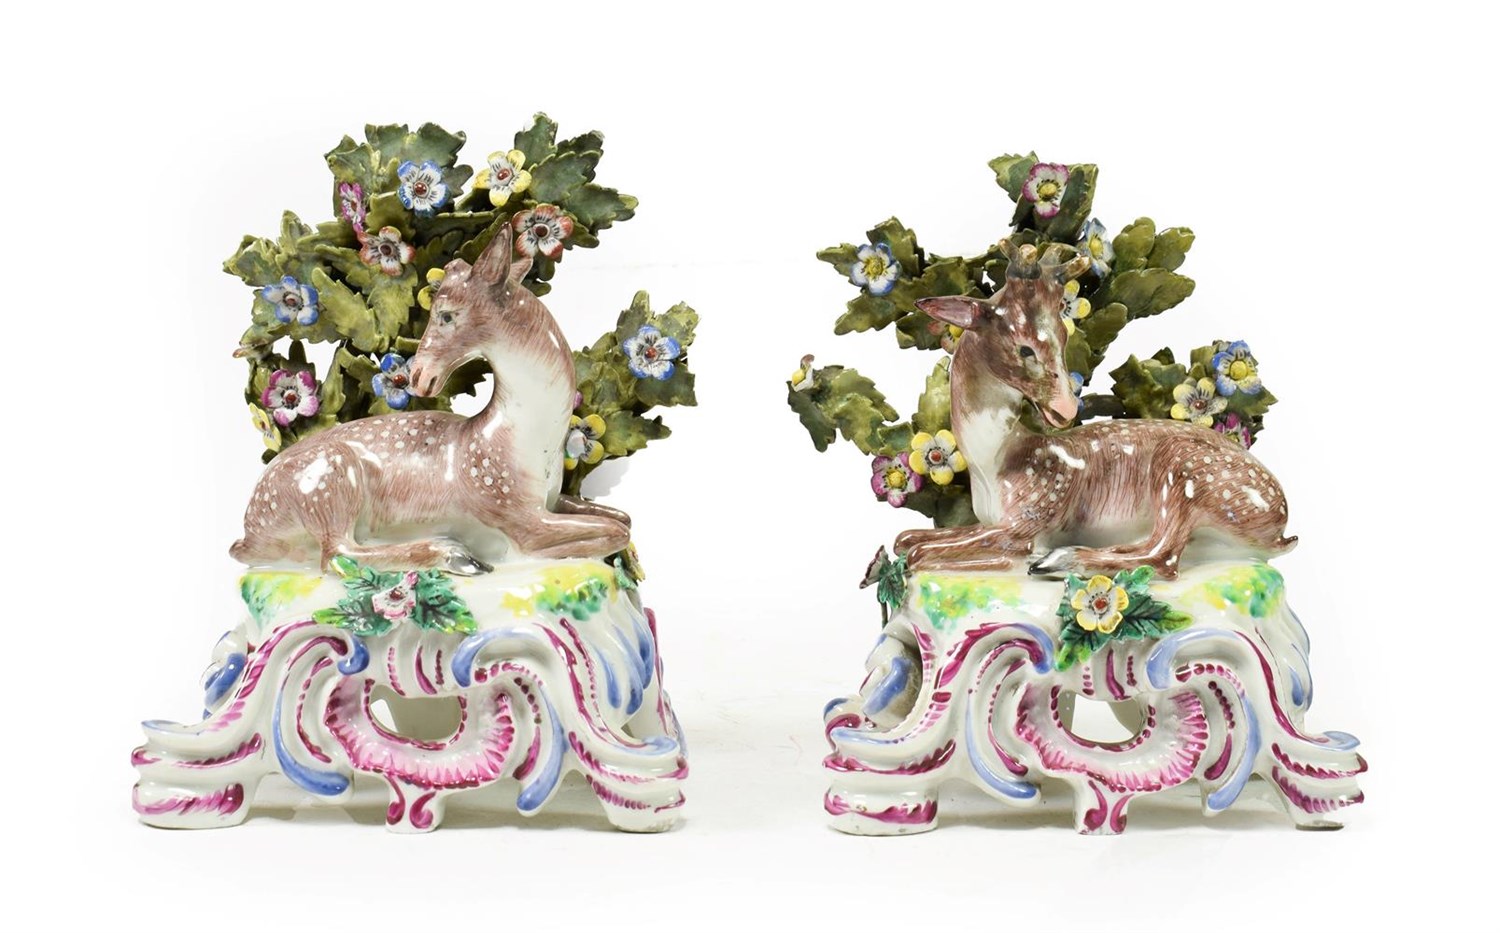 Lot 64 - A Pair of Samson of Paris Porcelain Figures of a Stag and Doe, late 19th century, after Bow...